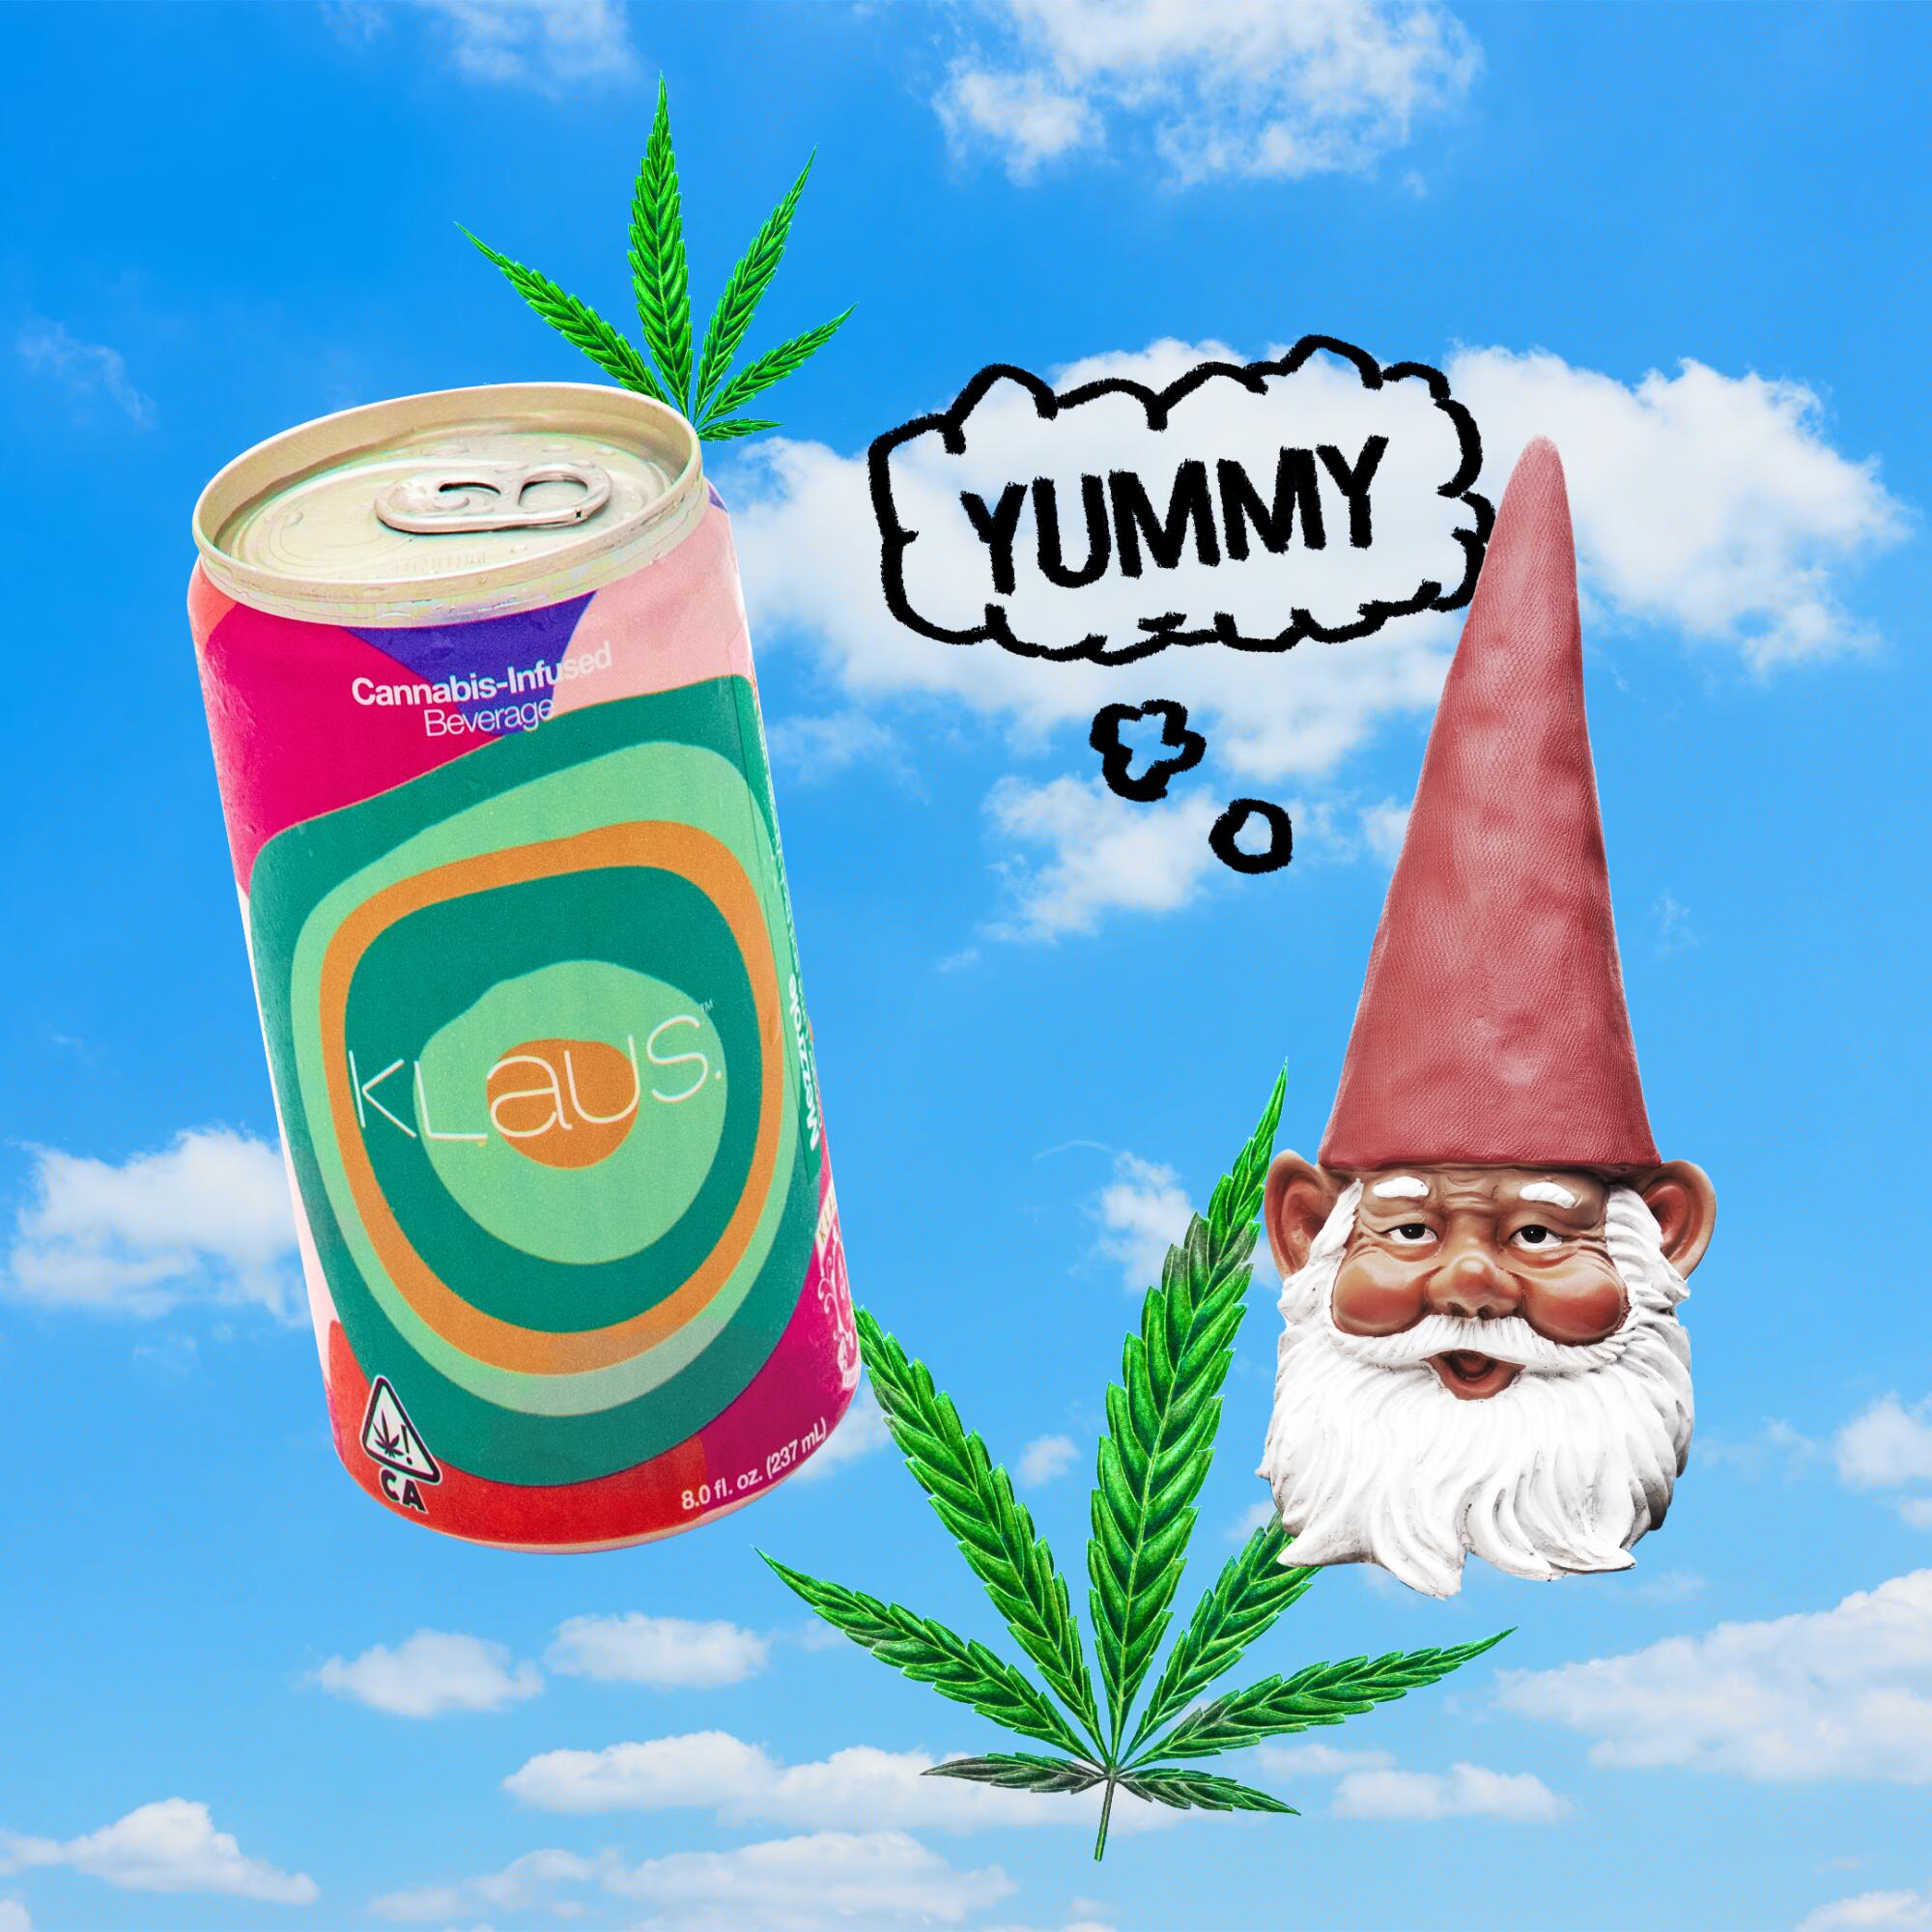 A can of Klaus cannabis-infused beverage and an illustration of a gnome, Klaus' mascot, and a thought bubble reading "yummy."